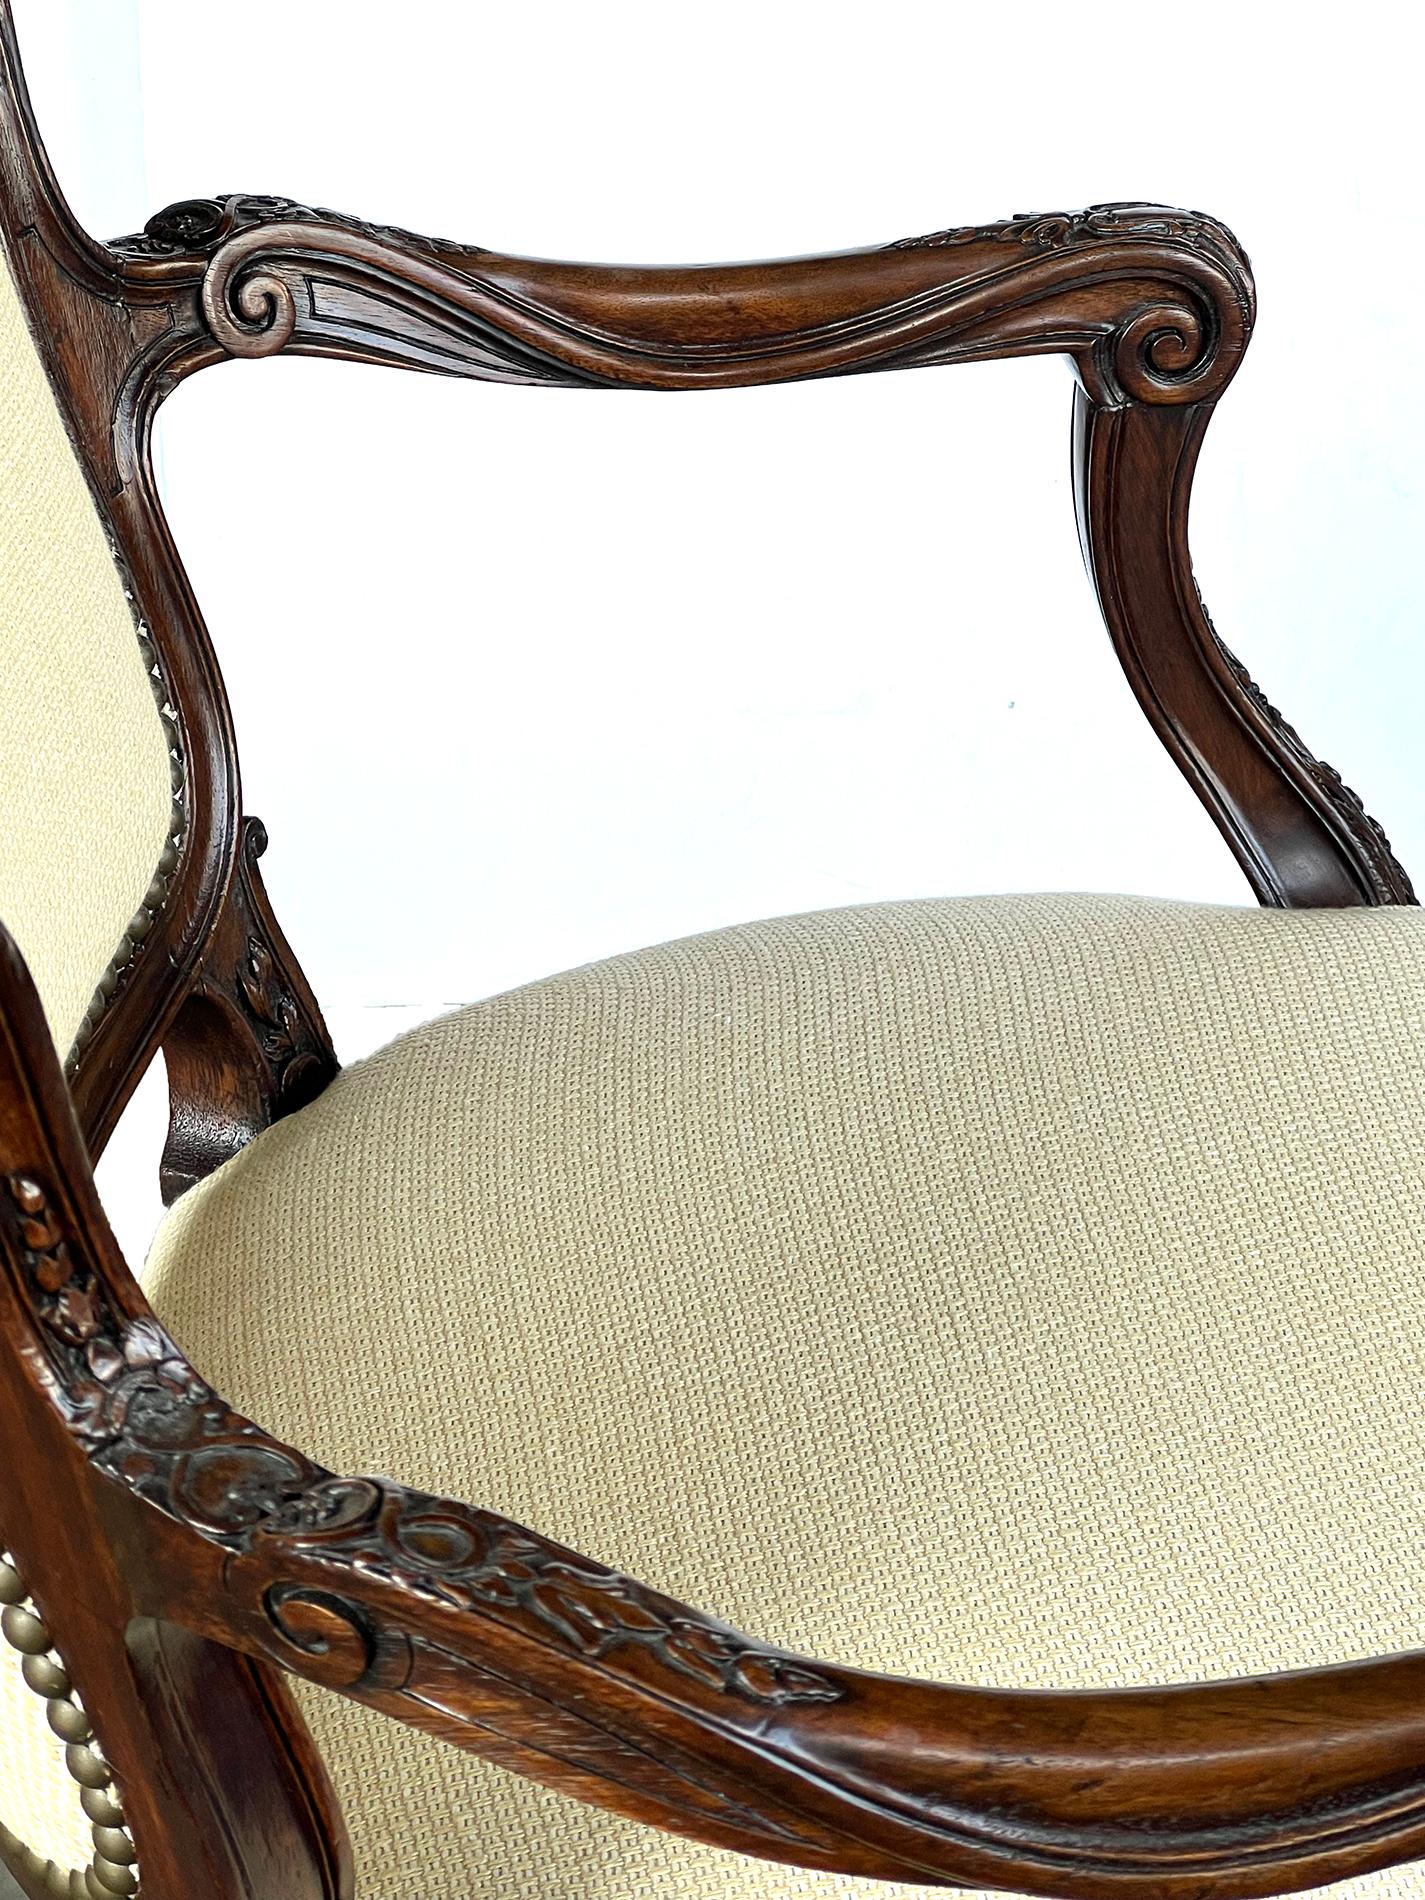 Rococo Revival A 19th Century Pair French Rococo Style Carved Open Arm Chairs For Sale